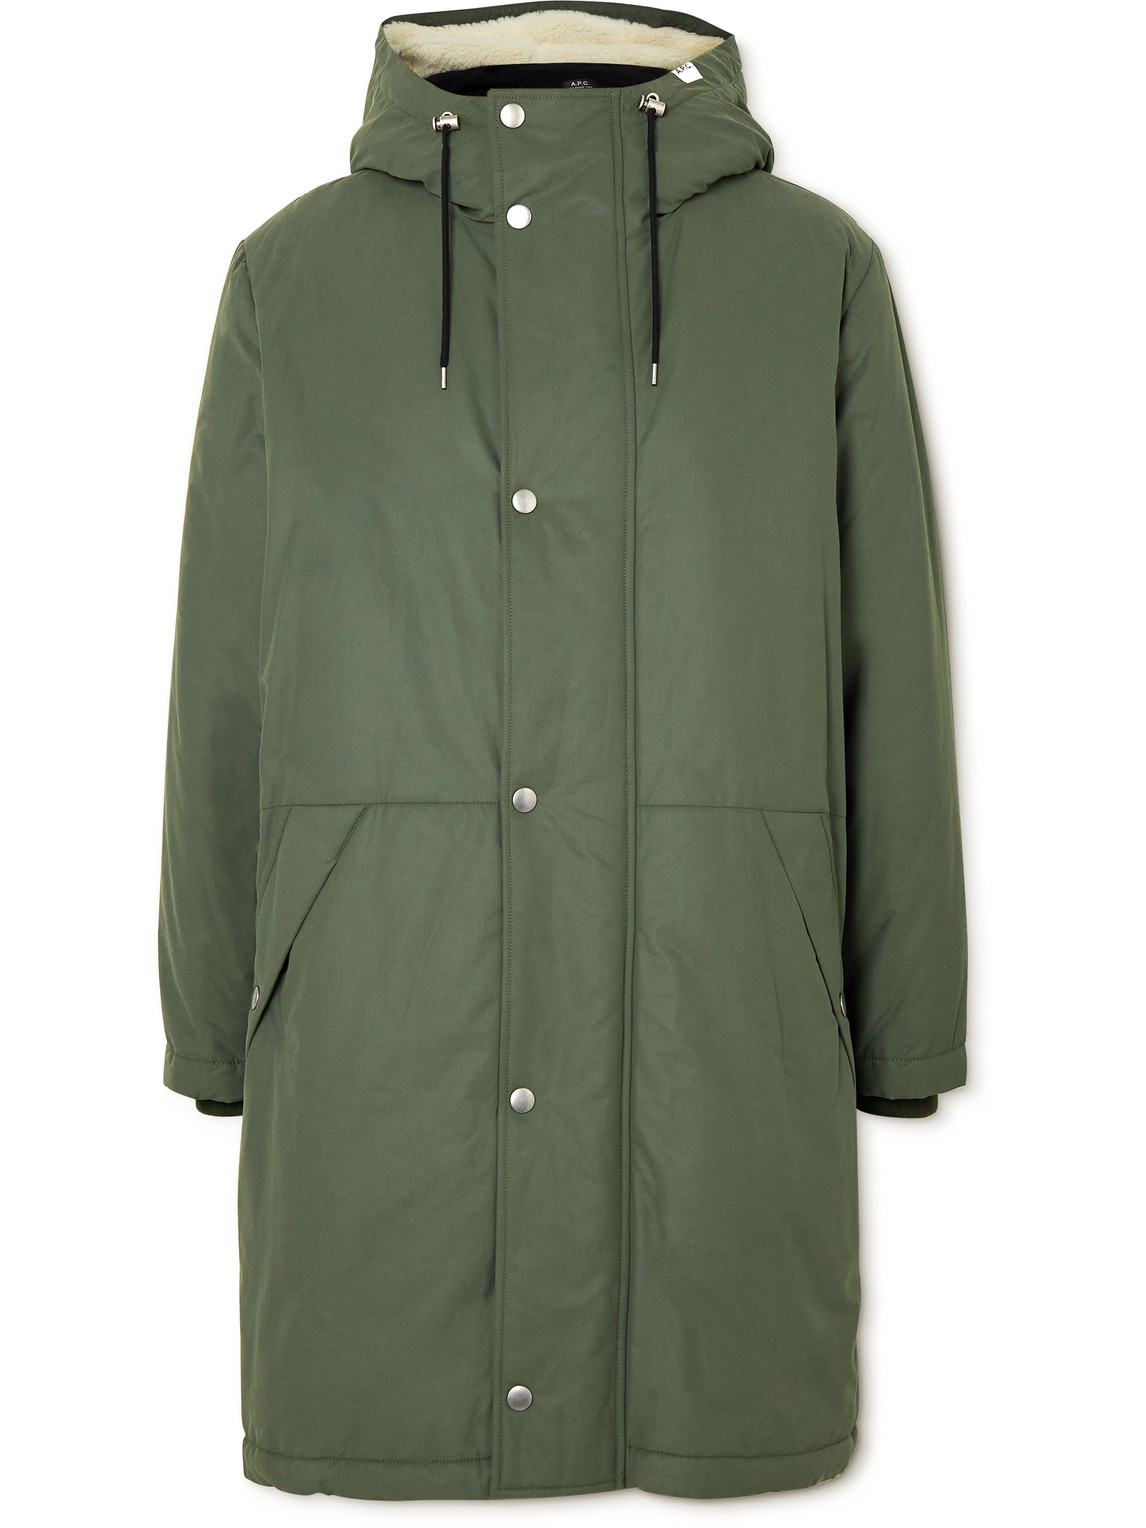 A.P.C. Hector Padded Cotton-Blend Parka